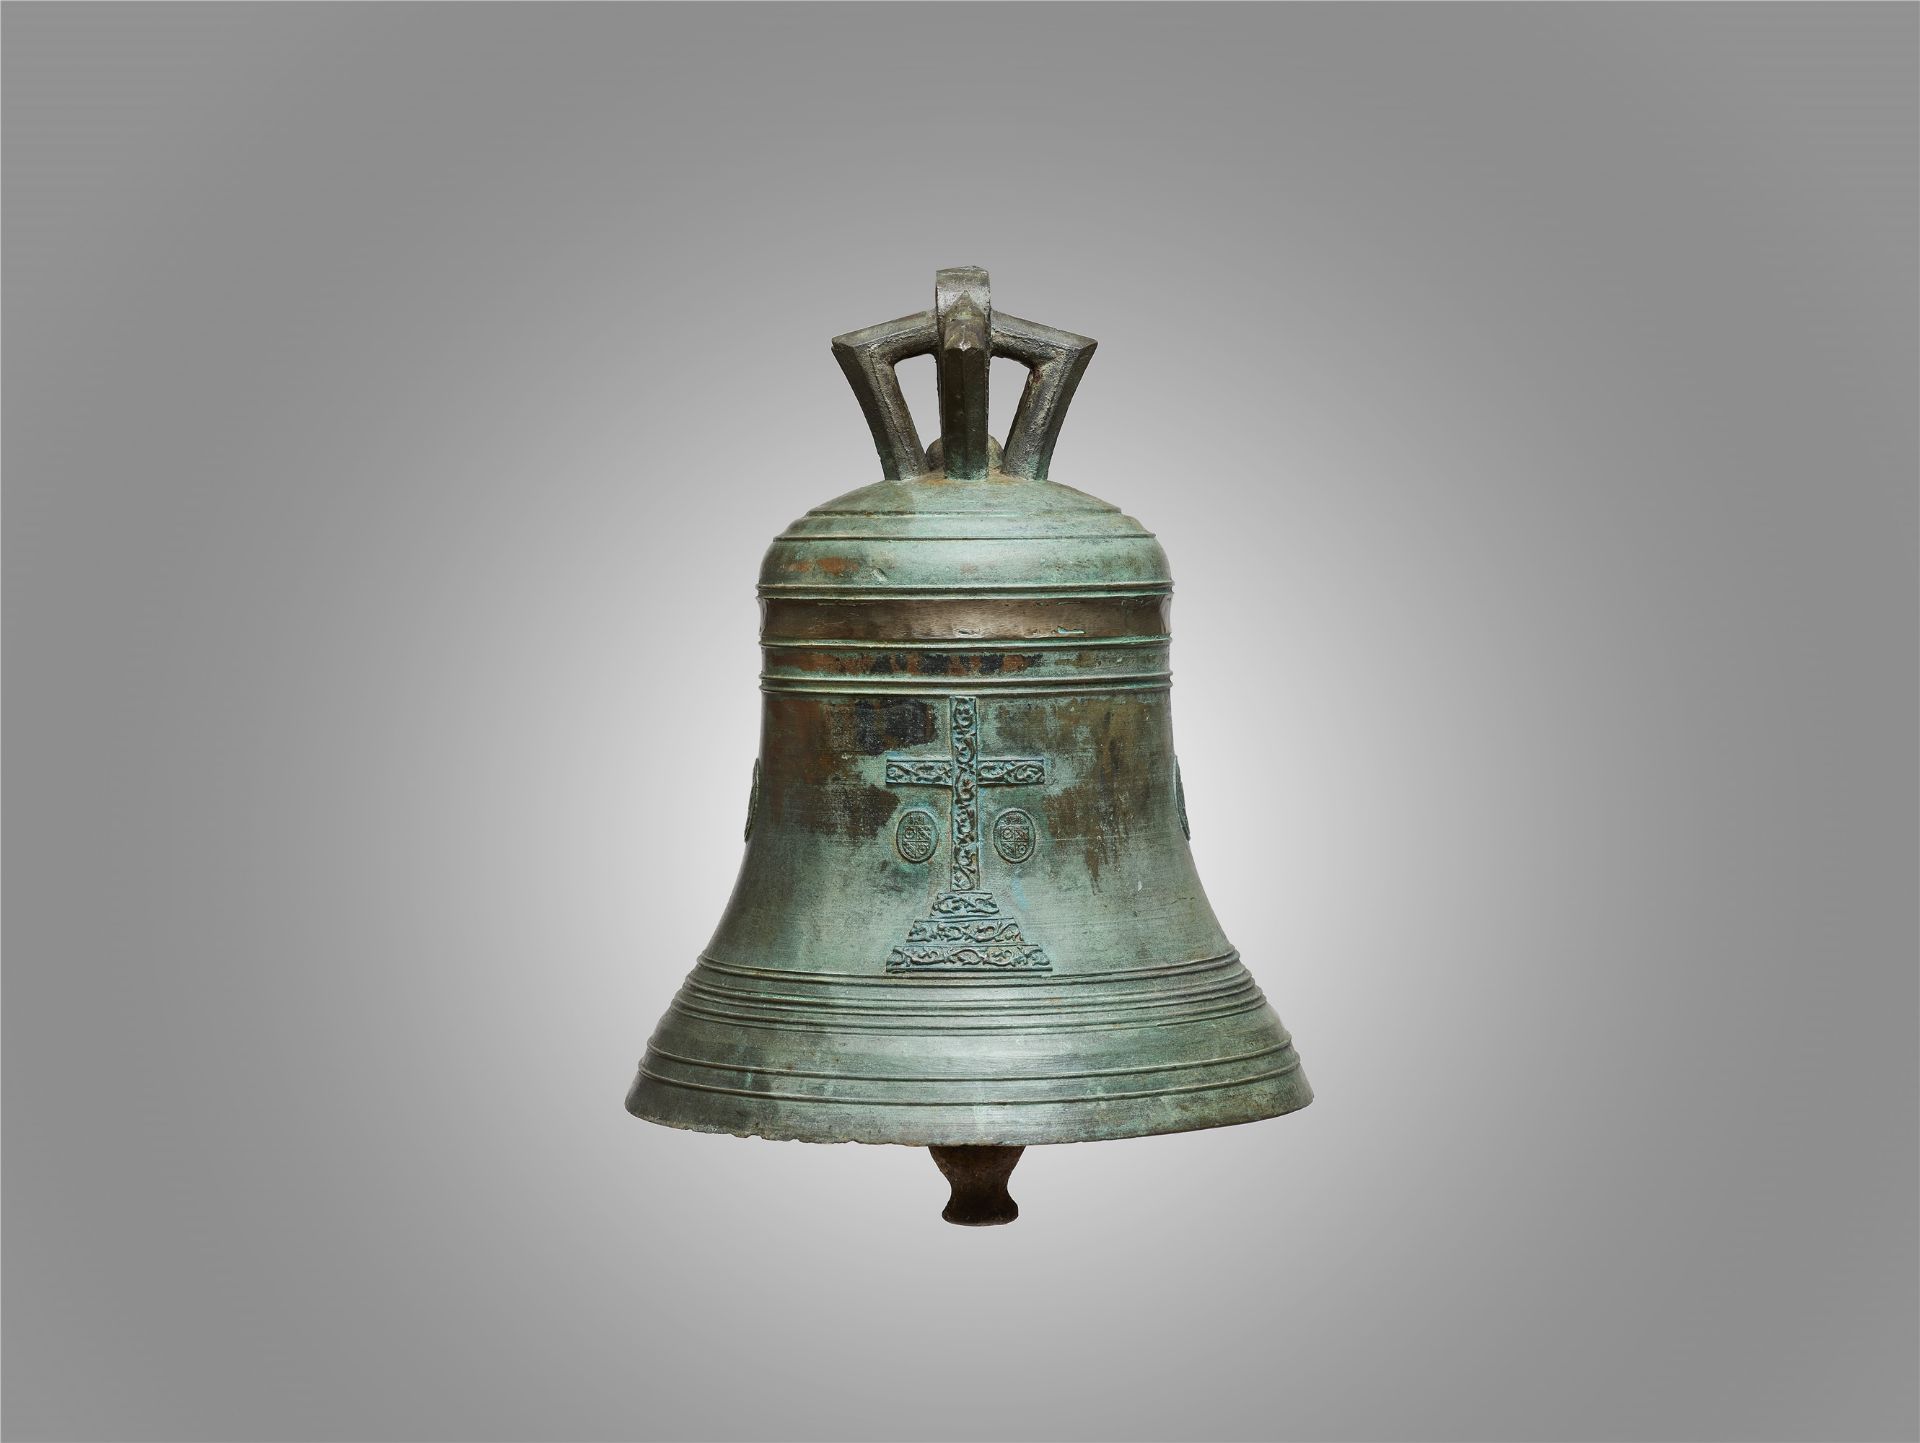 A rare bronze mission bell from 1609